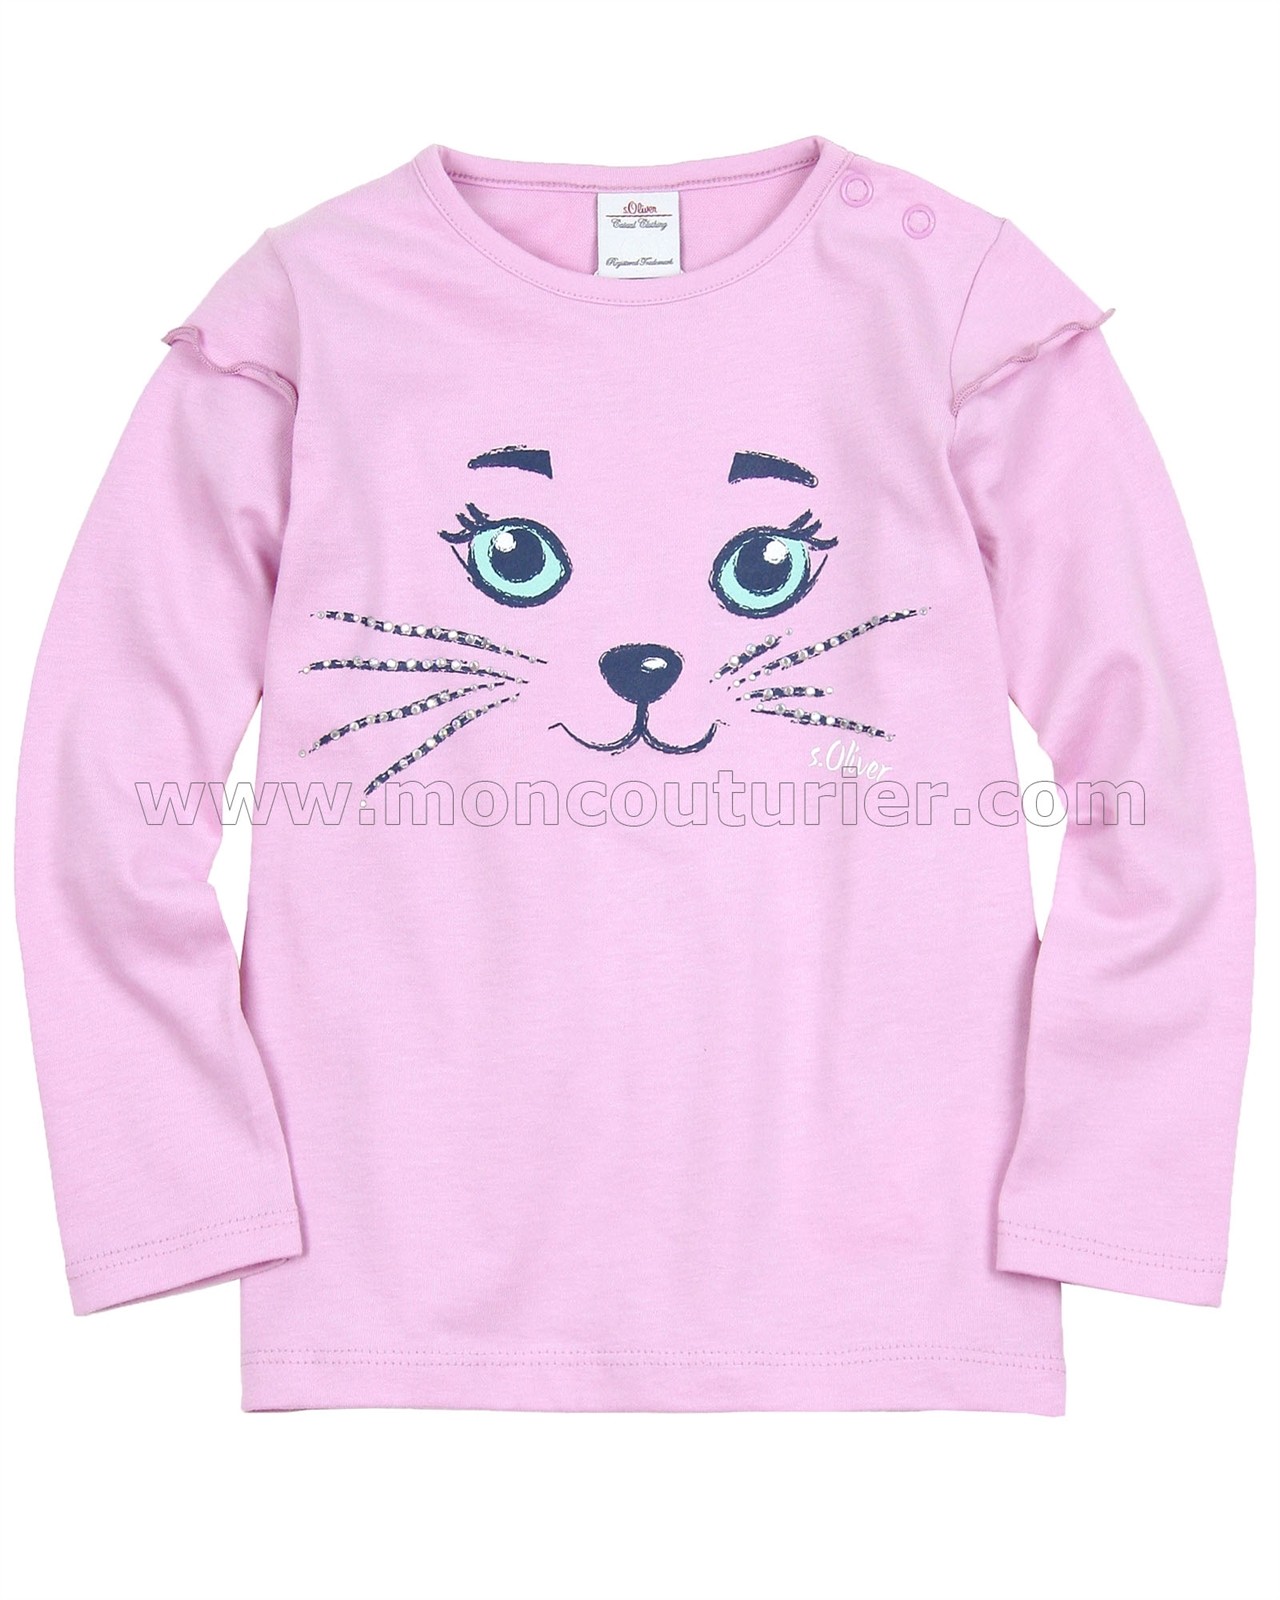 s.Oliver Baby Girls Pale Cat Face Top Pink with